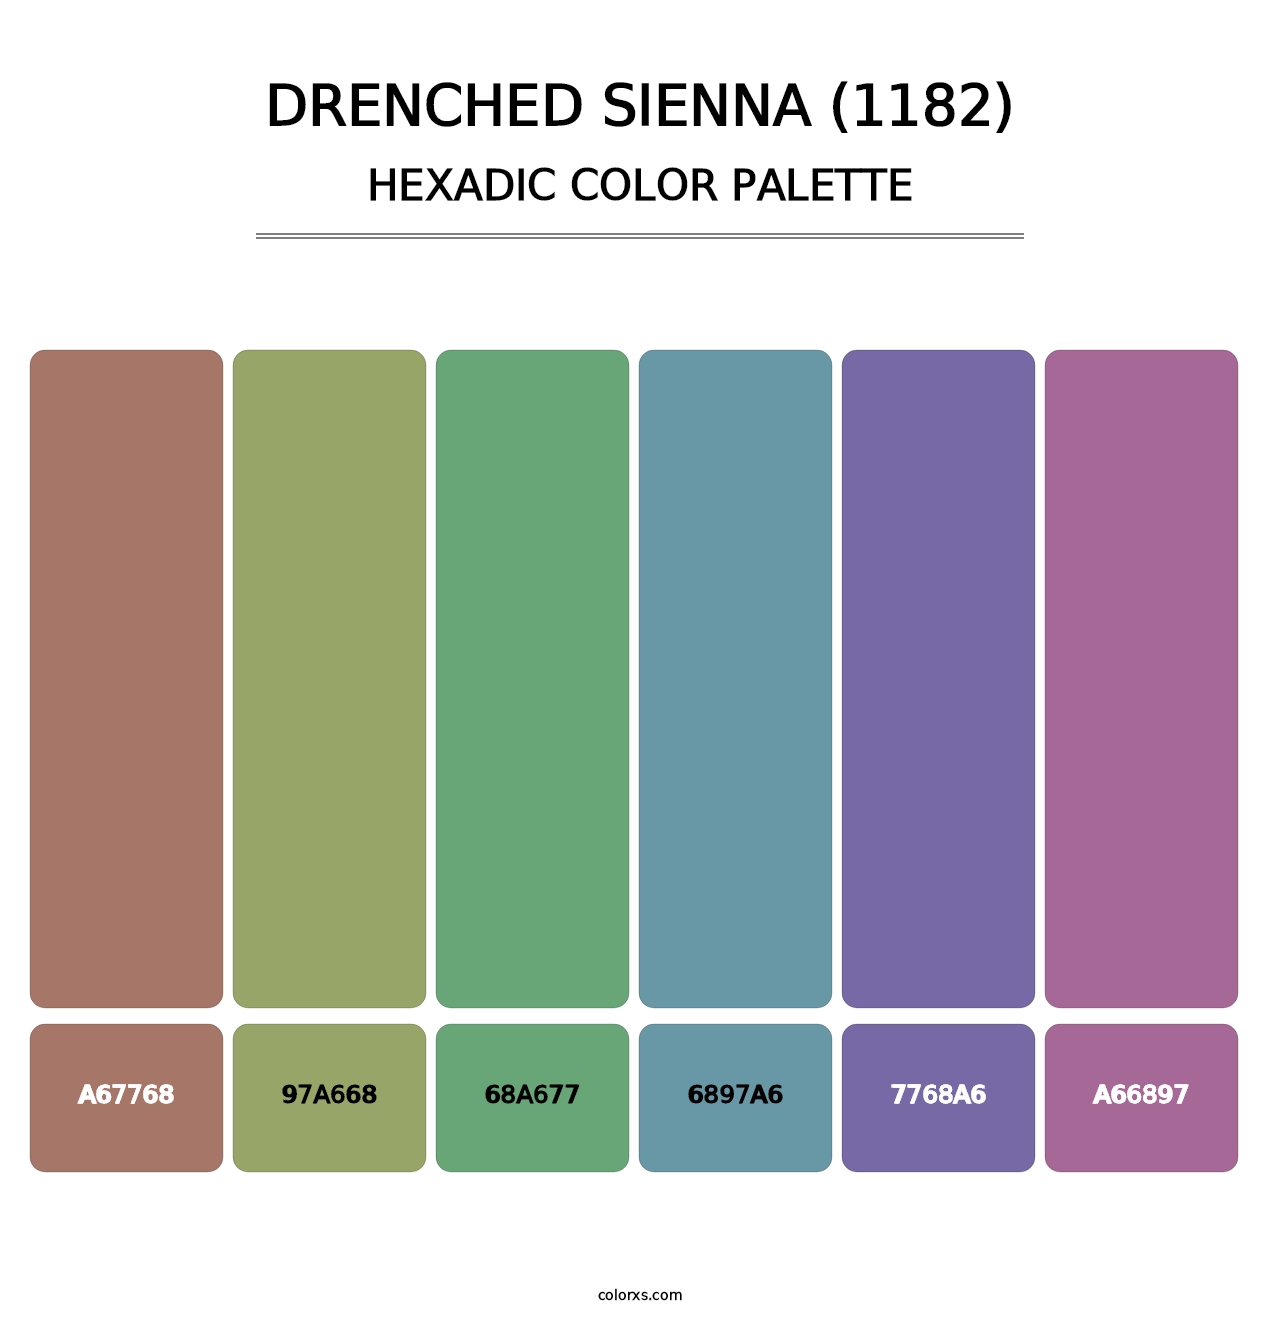 Drenched Sienna (1182) - Hexadic Color Palette